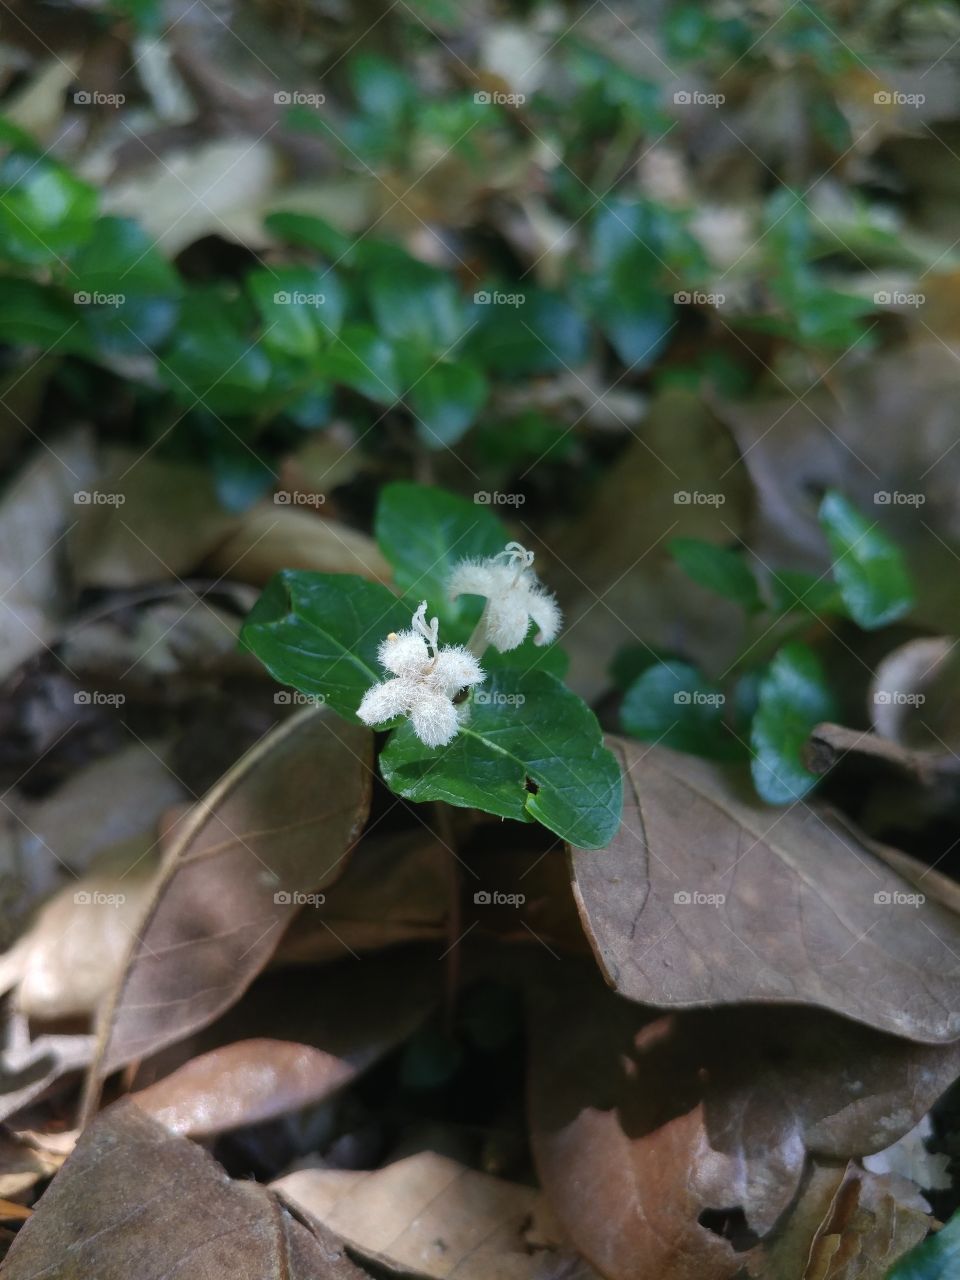 Two Mitchella repens (Partridge berry) flowers blooming in a forest just above the leaves.